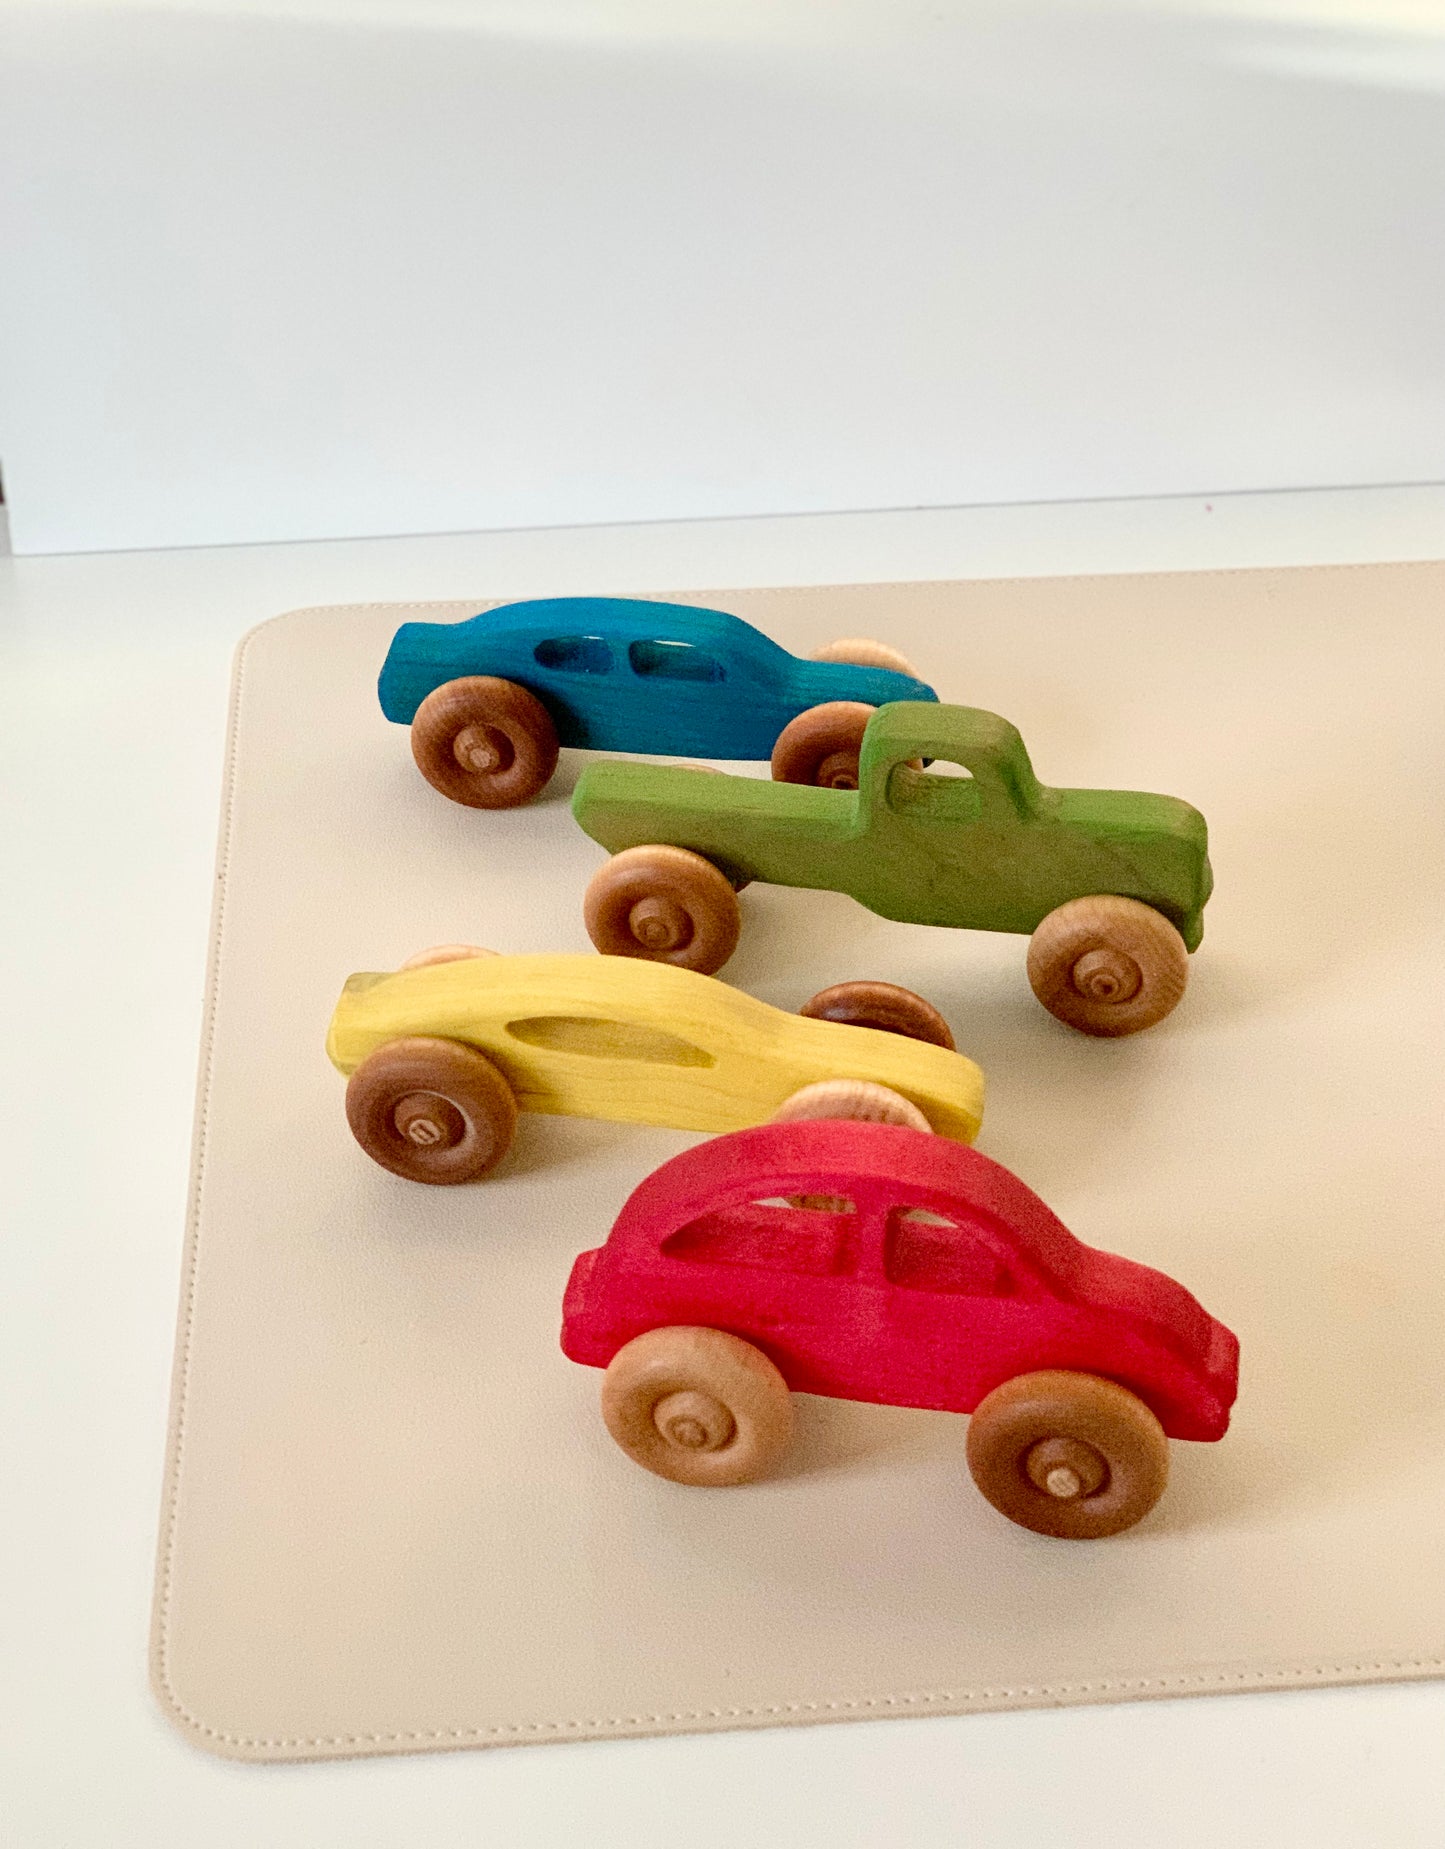 Wooden Toy Vehicles - Trucks, Car, Bus and Tractor / Push Car